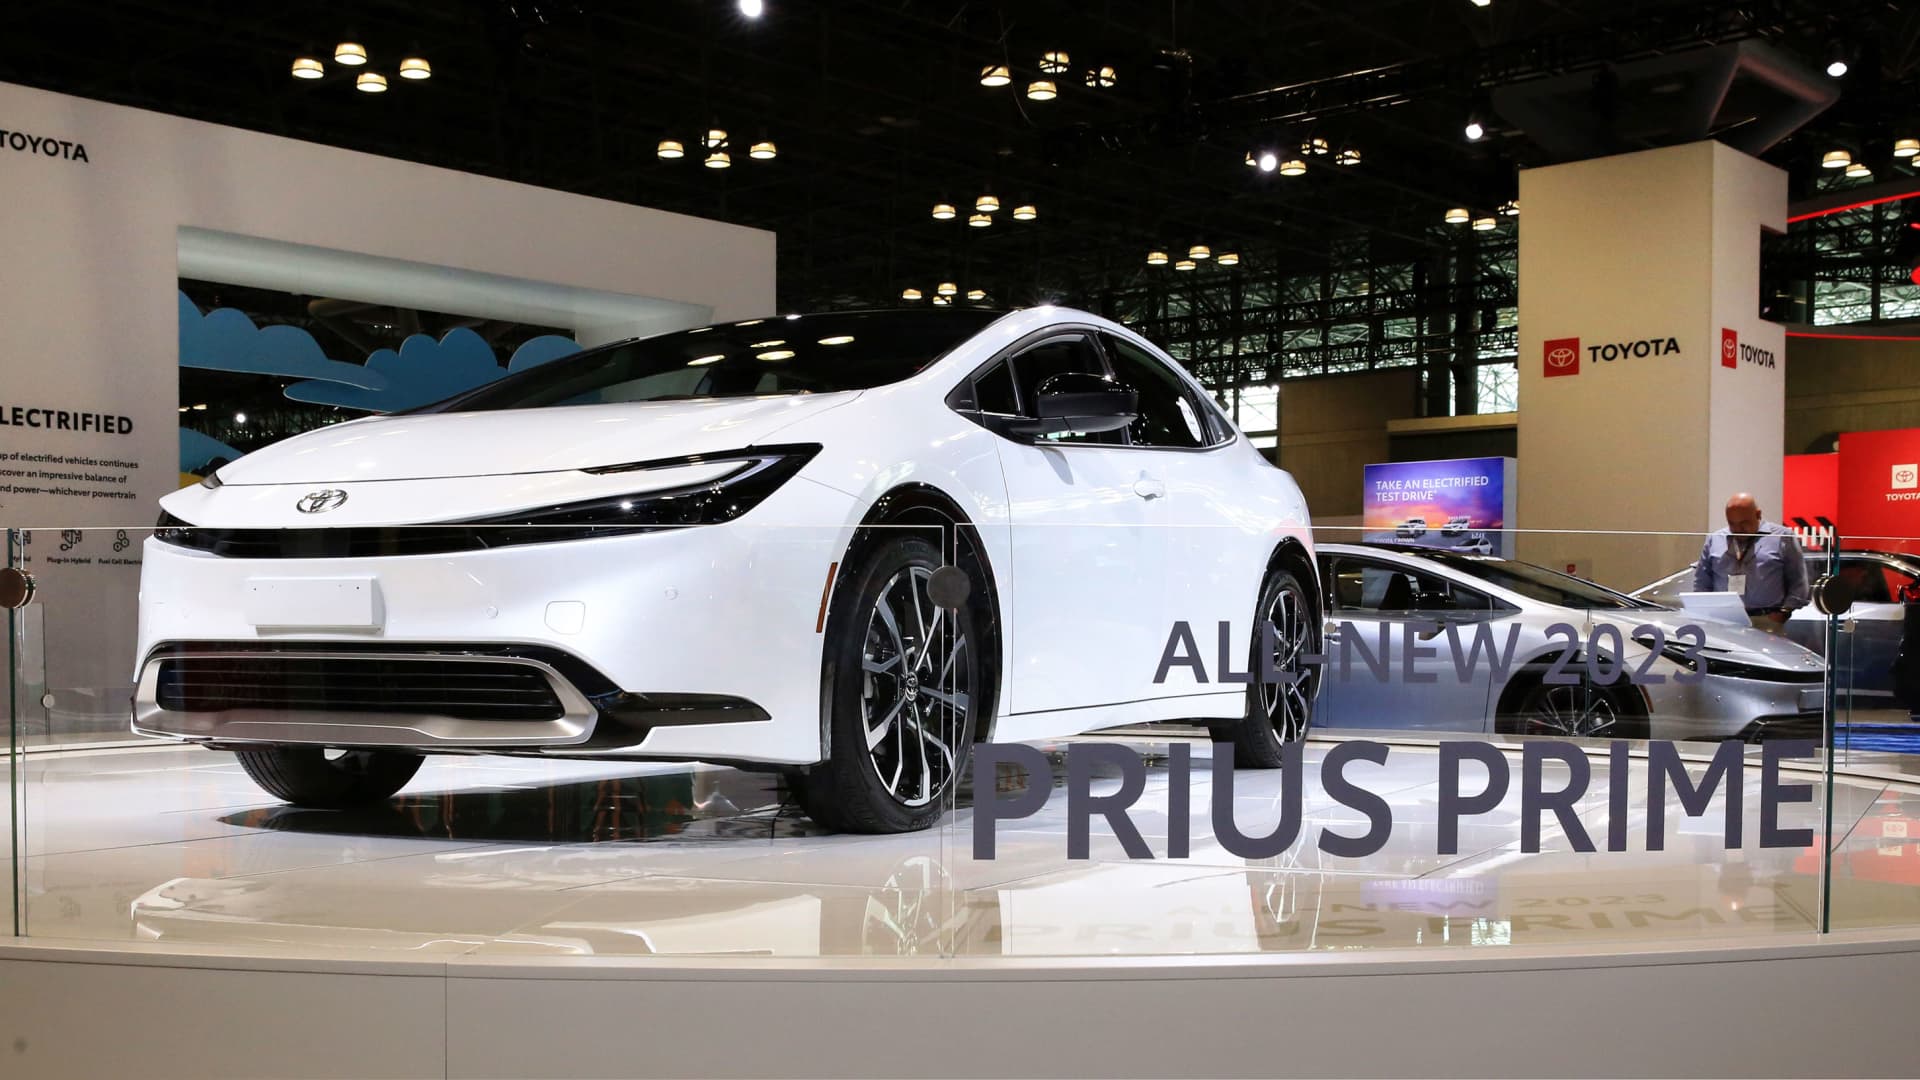 Automakers turn to hybrids in the middle of the EV transition